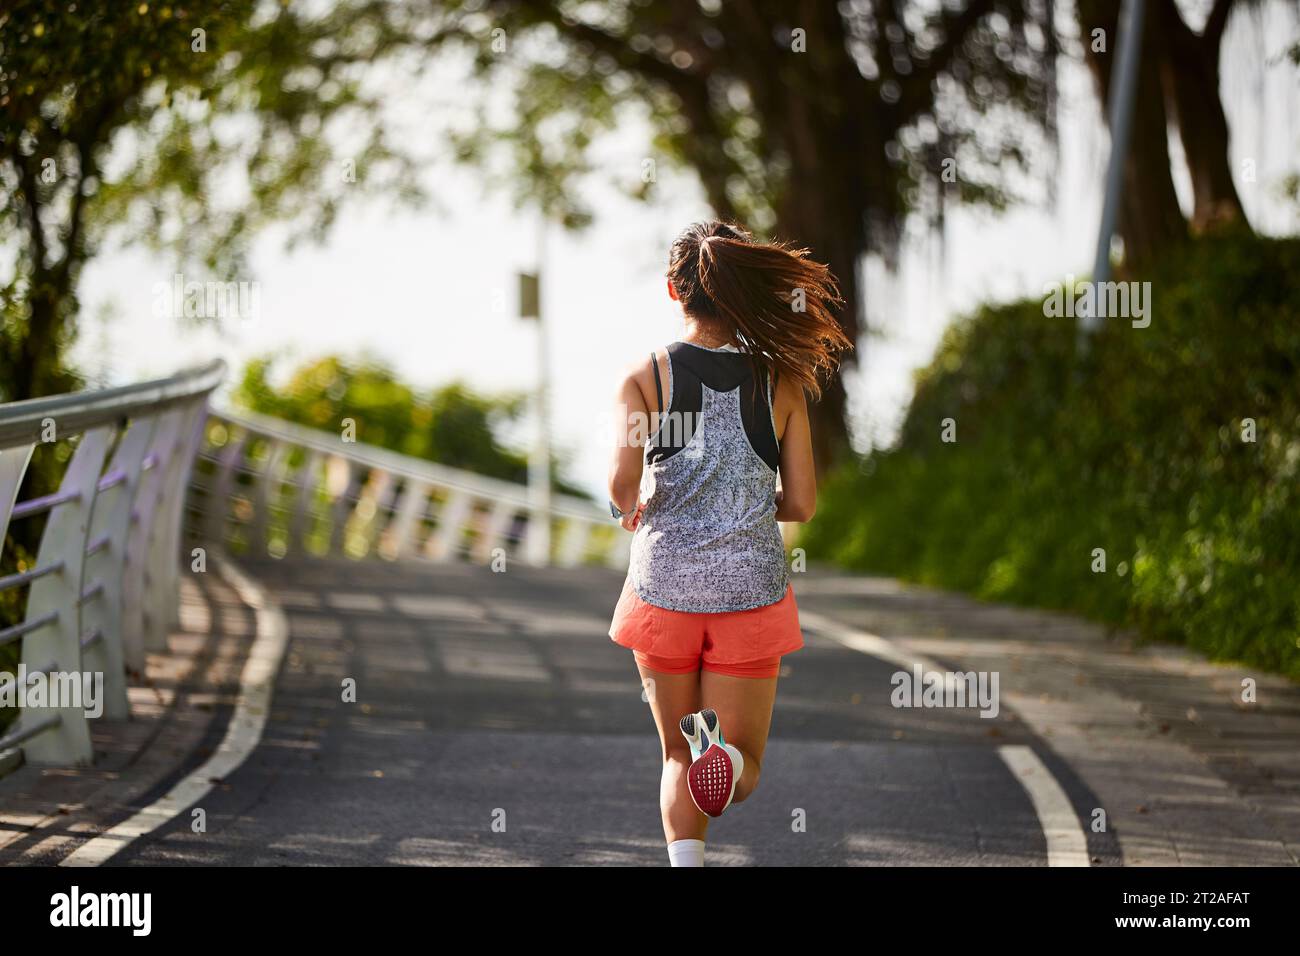 rear view of young asian woman running jogging outdoors in park Stock Photo